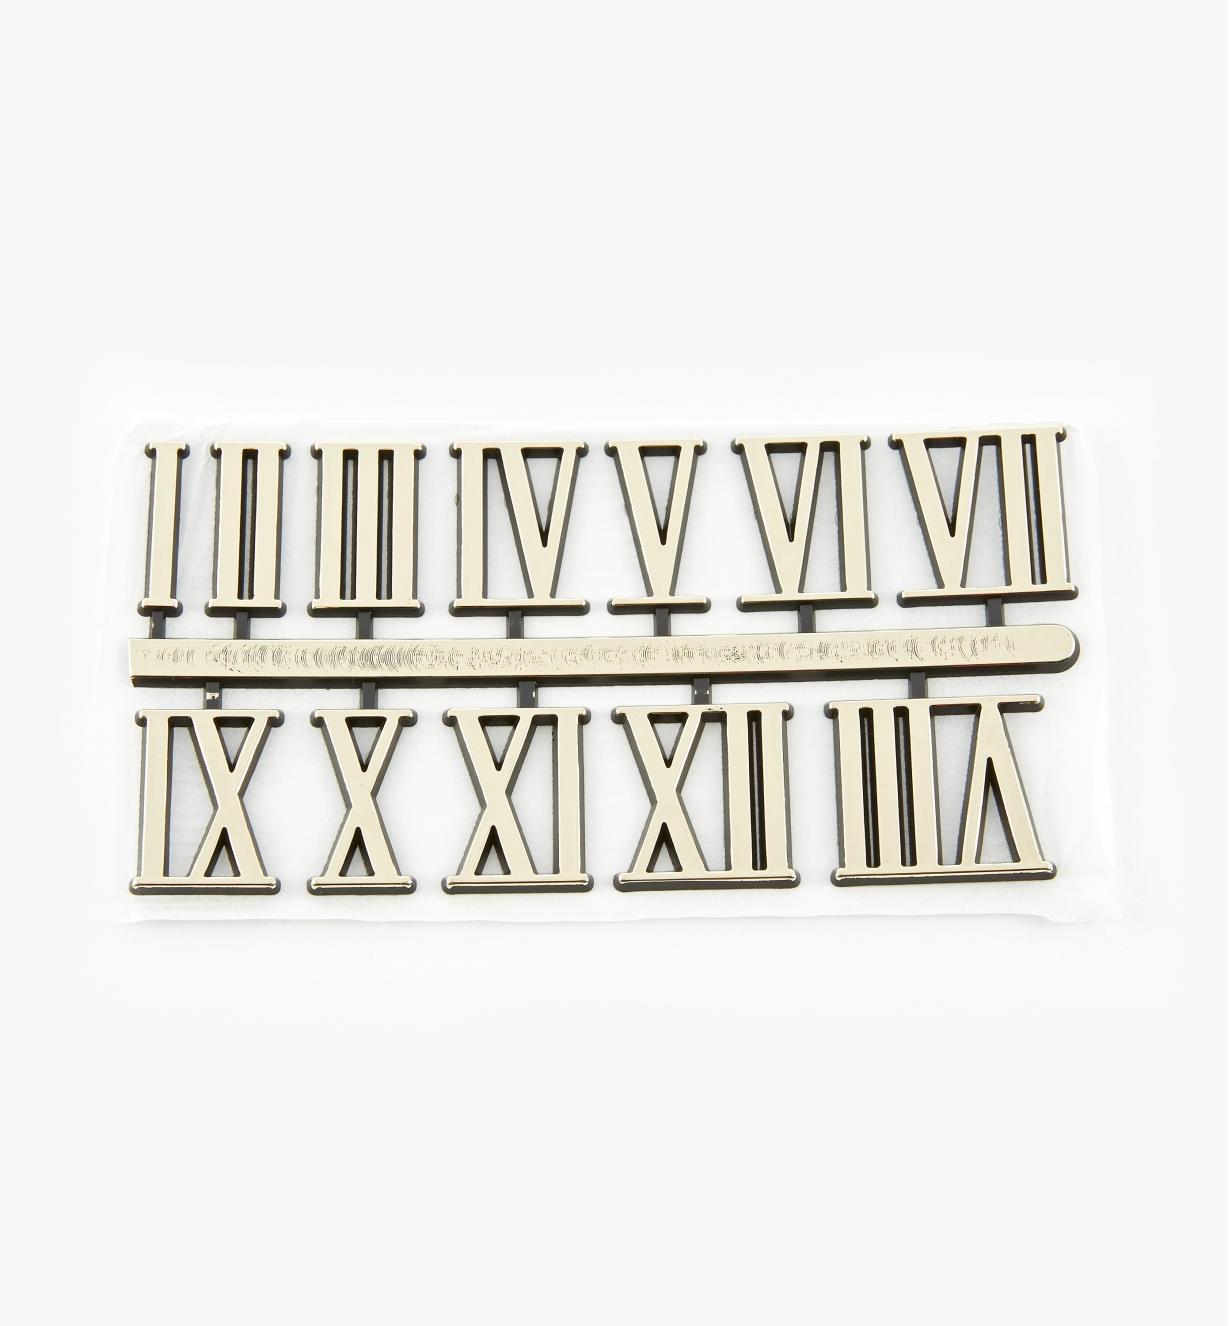 46K5701 - 1" Roman Adhesive-Backed Numerals, set of 12